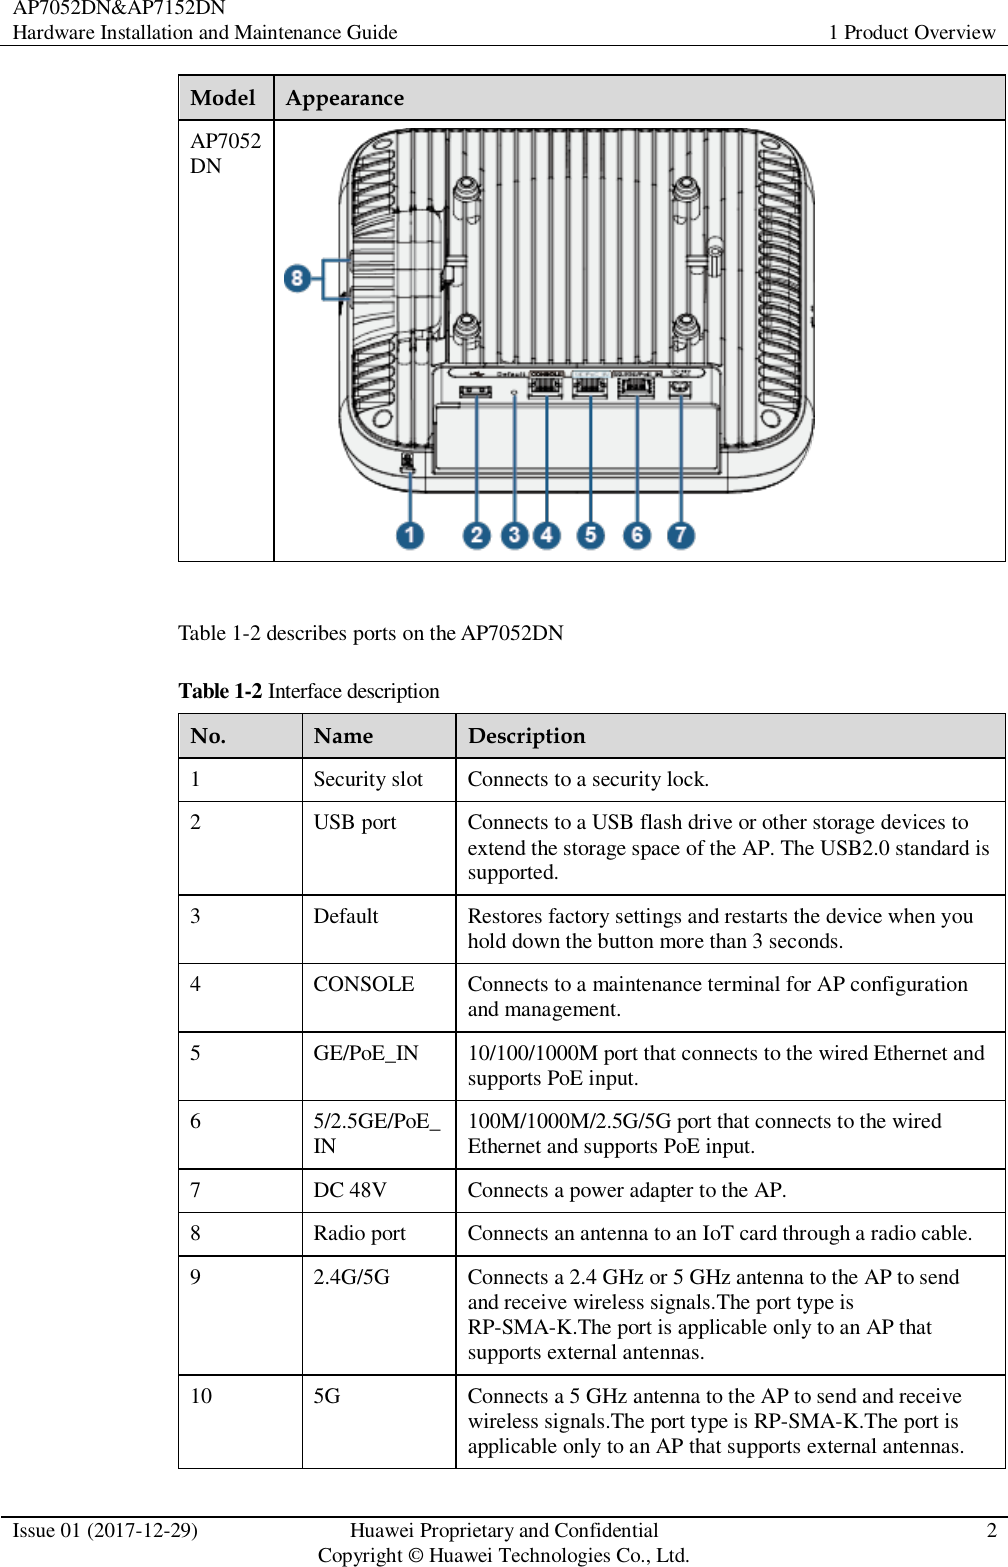 AP7052DN&amp;AP7152DN Hardware Installation and Maintenance Guide 1 Product Overview  Issue 01 (2017-12-29) Huawei Proprietary and Confidential                                     Copyright © Huawei Technologies Co., Ltd. 2  Model Appearance AP7052DN   Table 1-2 describes ports on the AP7052DN   Table 1-2 Interface description No. Name Description 1 Security slot Connects to a security lock. 2 USB port Connects to a USB flash drive or other storage devices to extend the storage space of the AP. The USB2.0 standard is supported. 3 Default Restores factory settings and restarts the device when you hold down the button more than 3 seconds. 4 CONSOLE Connects to a maintenance terminal for AP configuration and management. 5 GE/PoE_IN 10/100/1000M port that connects to the wired Ethernet and supports PoE input. 6 5/2.5GE/PoE_IN 100M/1000M/2.5G/5G port that connects to the wired Ethernet and supports PoE input. 7 DC 48V Connects a power adapter to the AP. 8 Radio port Connects an antenna to an IoT card through a radio cable. 9 2.4G/5G Connects a 2.4 GHz or 5 GHz antenna to the AP to send and receive wireless signals.The port type is RP-SMA-K.The port is applicable only to an AP that supports external antennas. 10 5G Connects a 5 GHz antenna to the AP to send and receive wireless signals.The port type is RP-SMA-K.The port is applicable only to an AP that supports external antennas. 